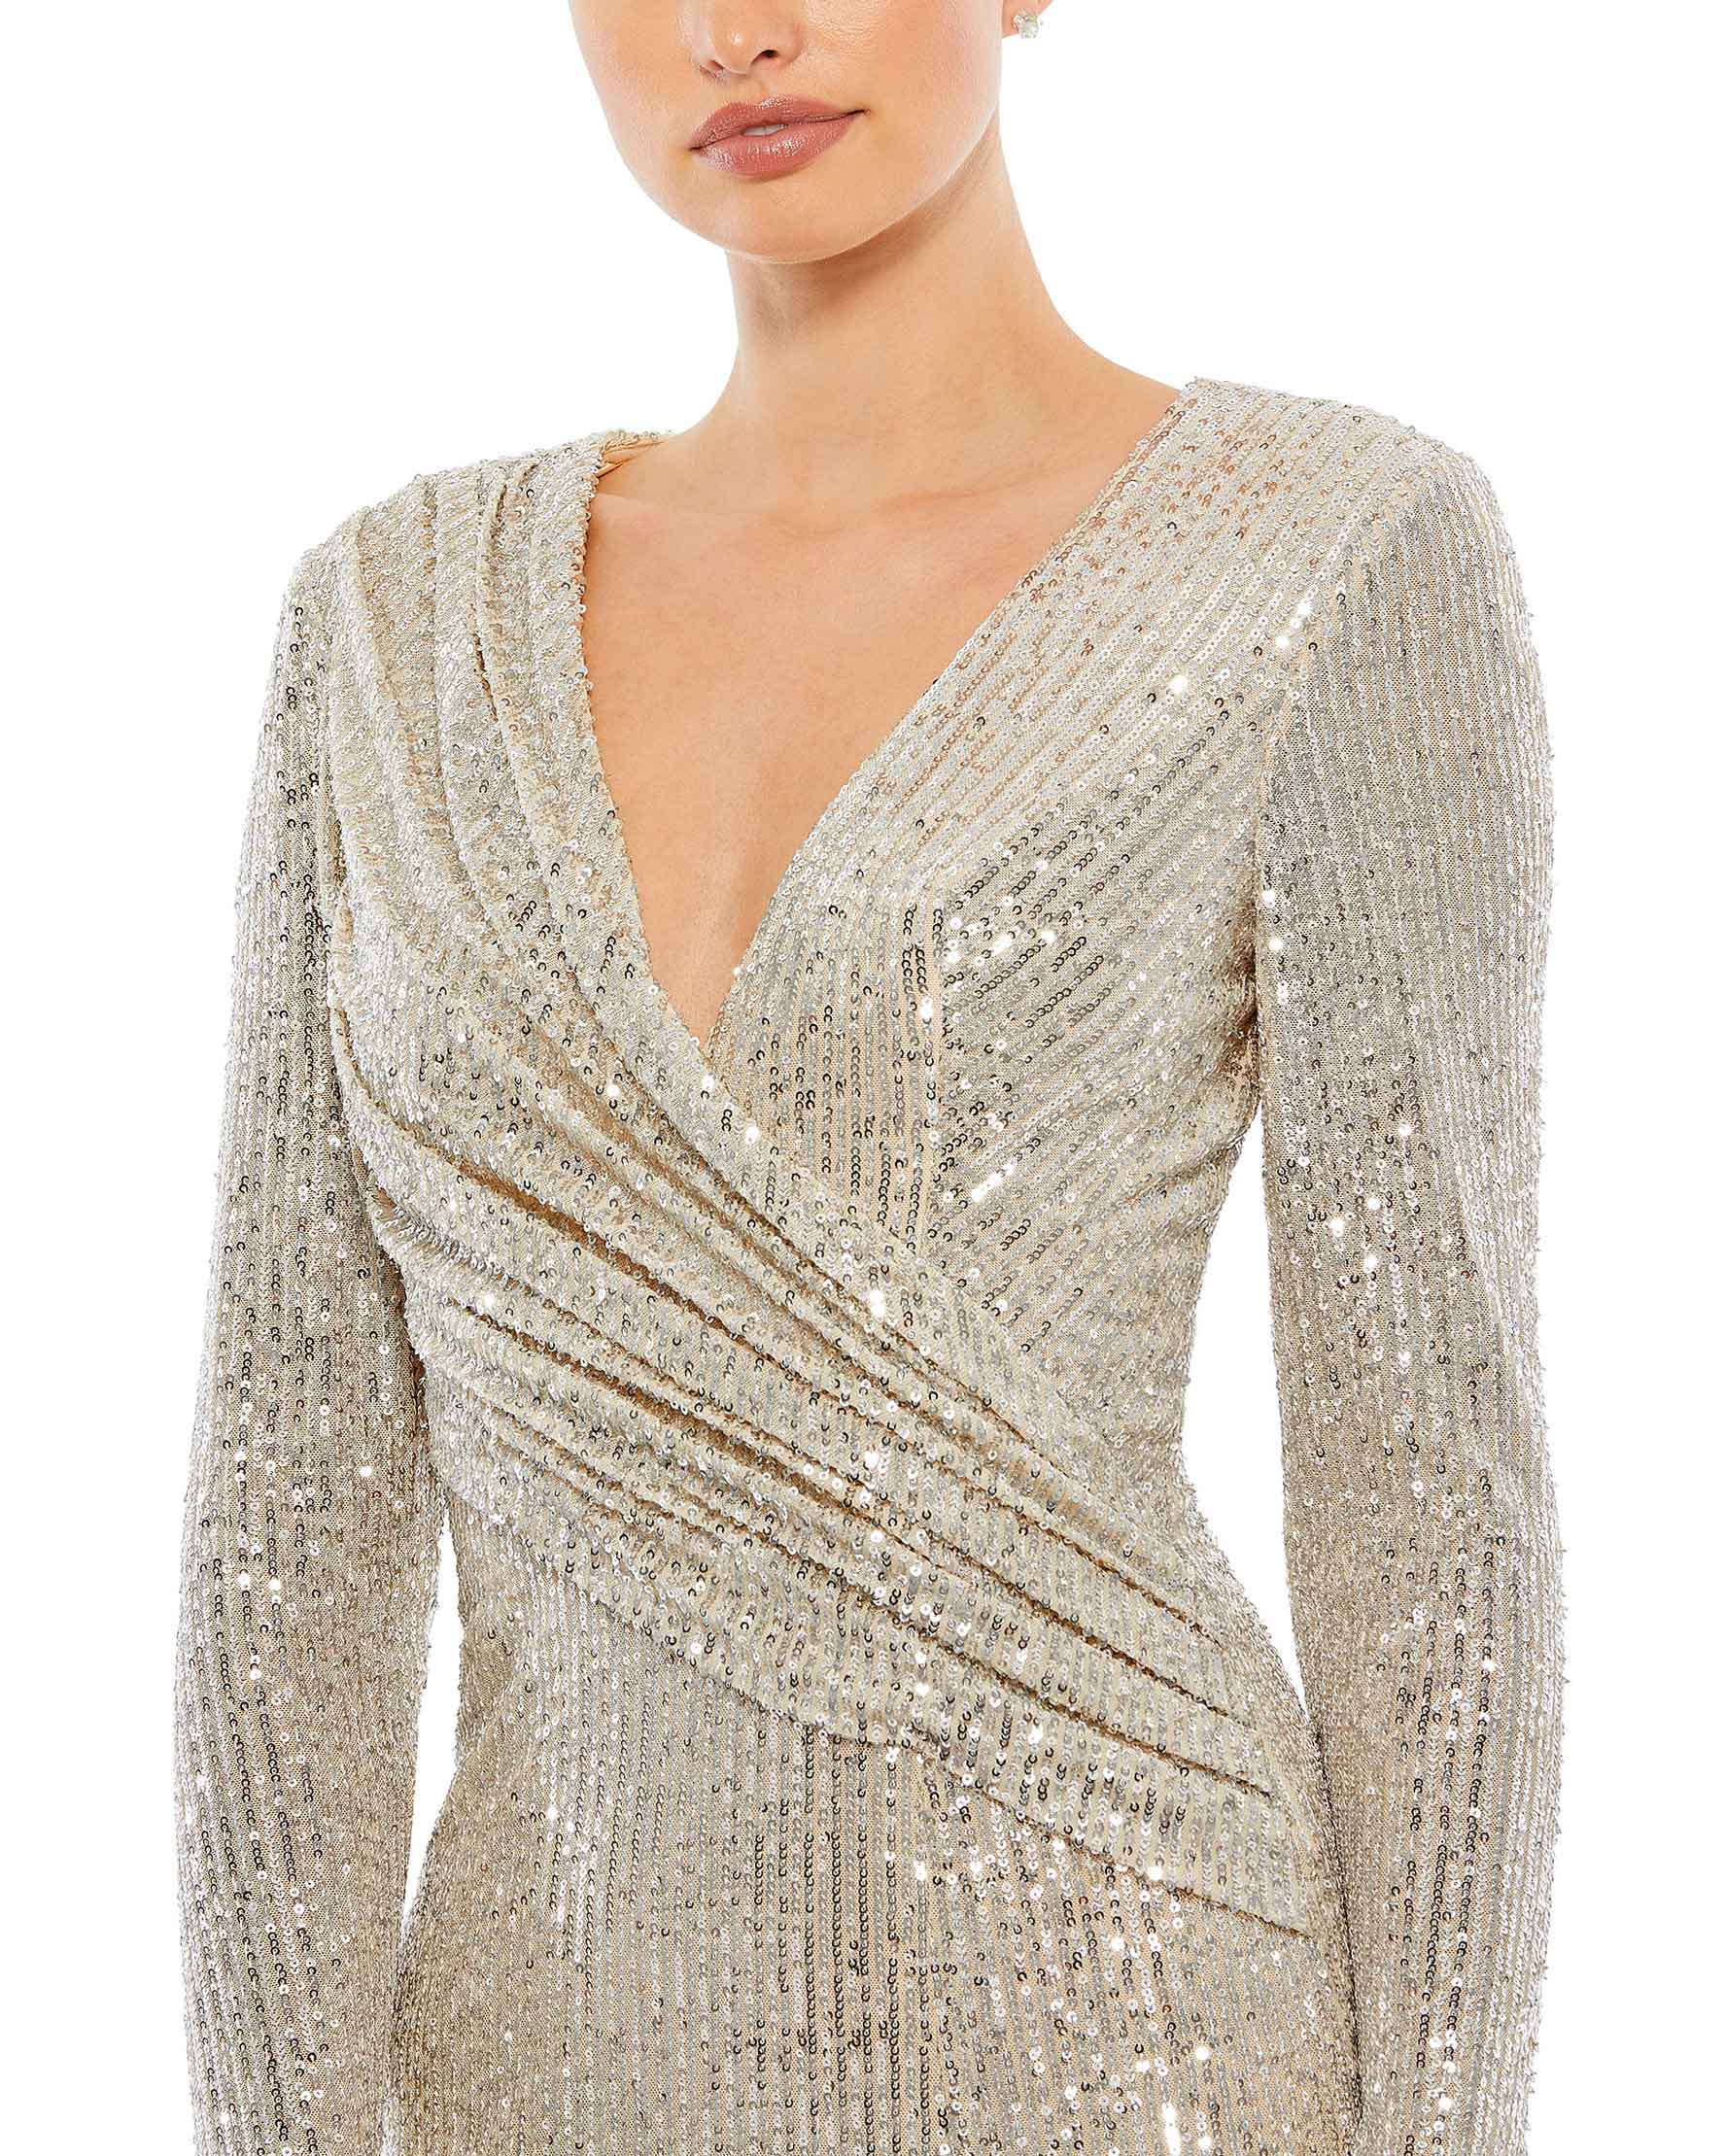 Sequined Long Sleeve Faux Wrap Ruched Gown